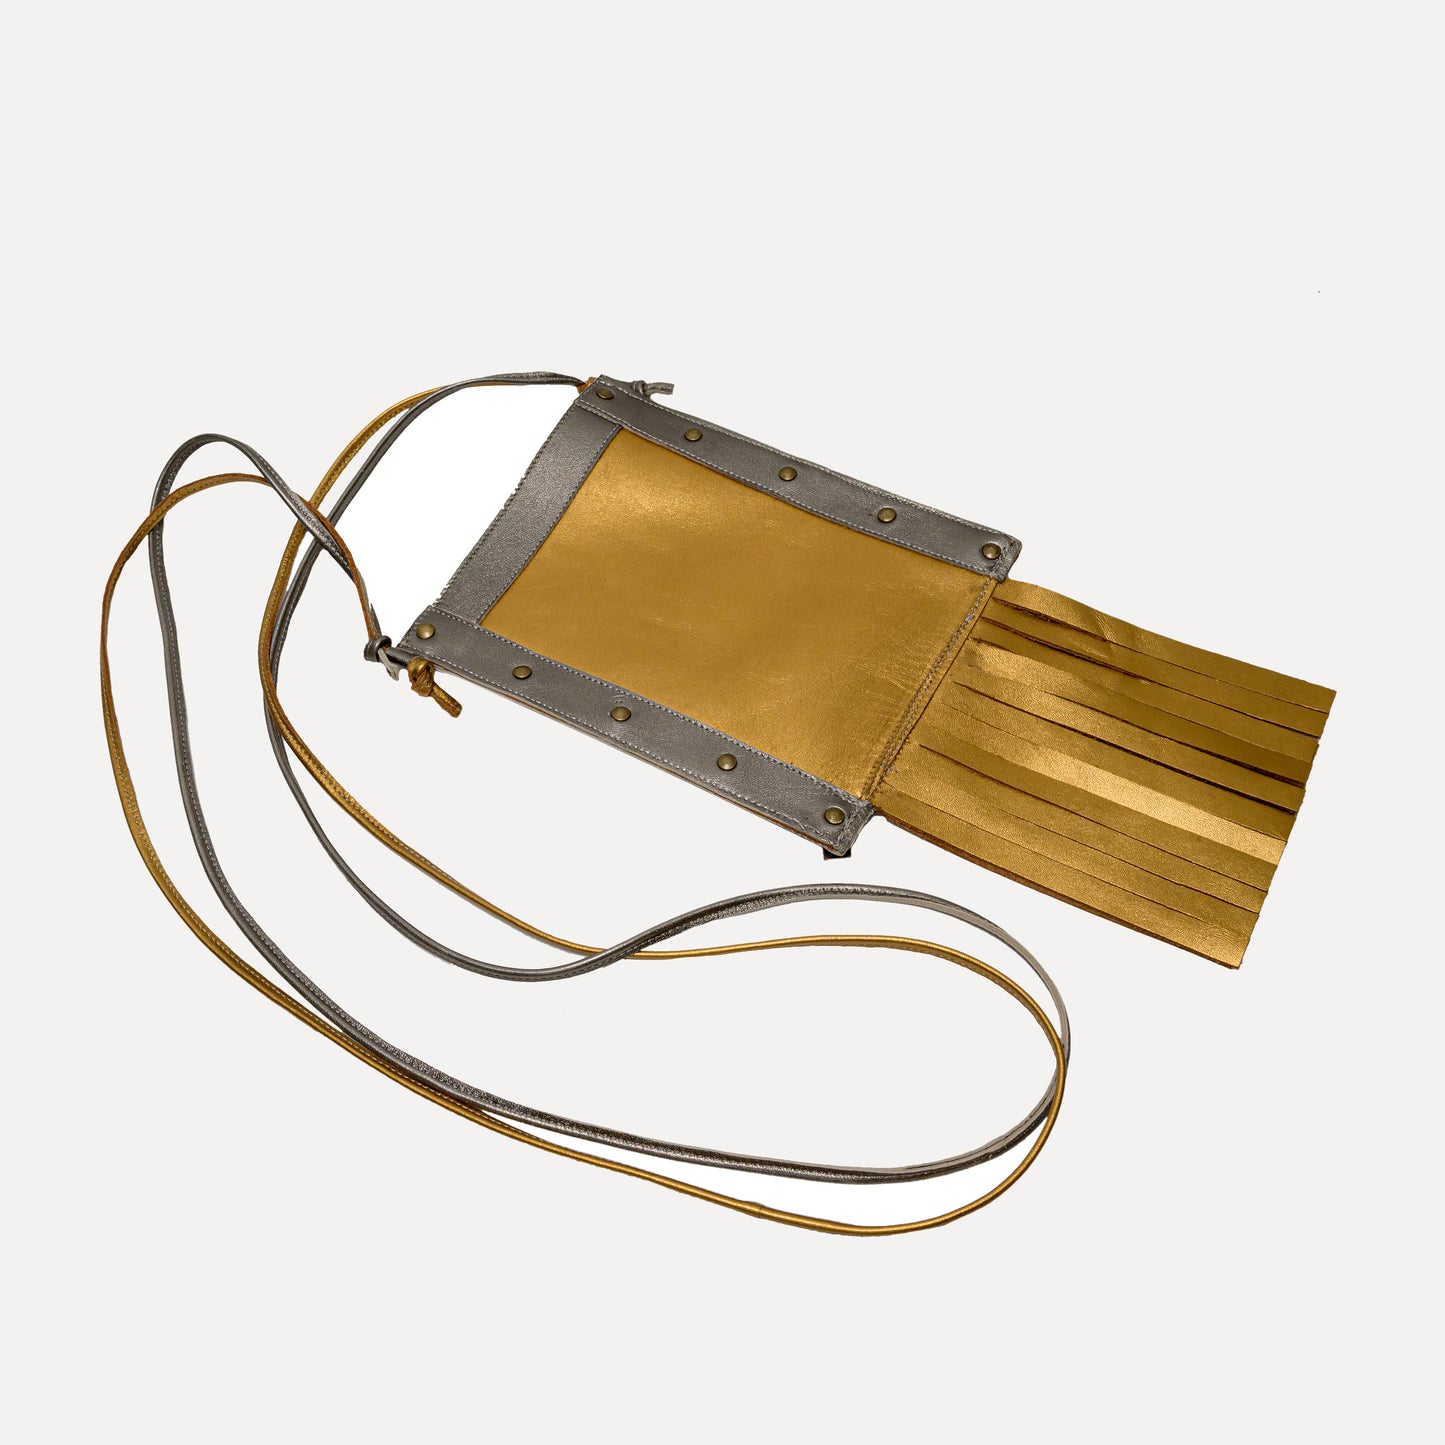 Talhas - cross body and belt bag in gold and silver